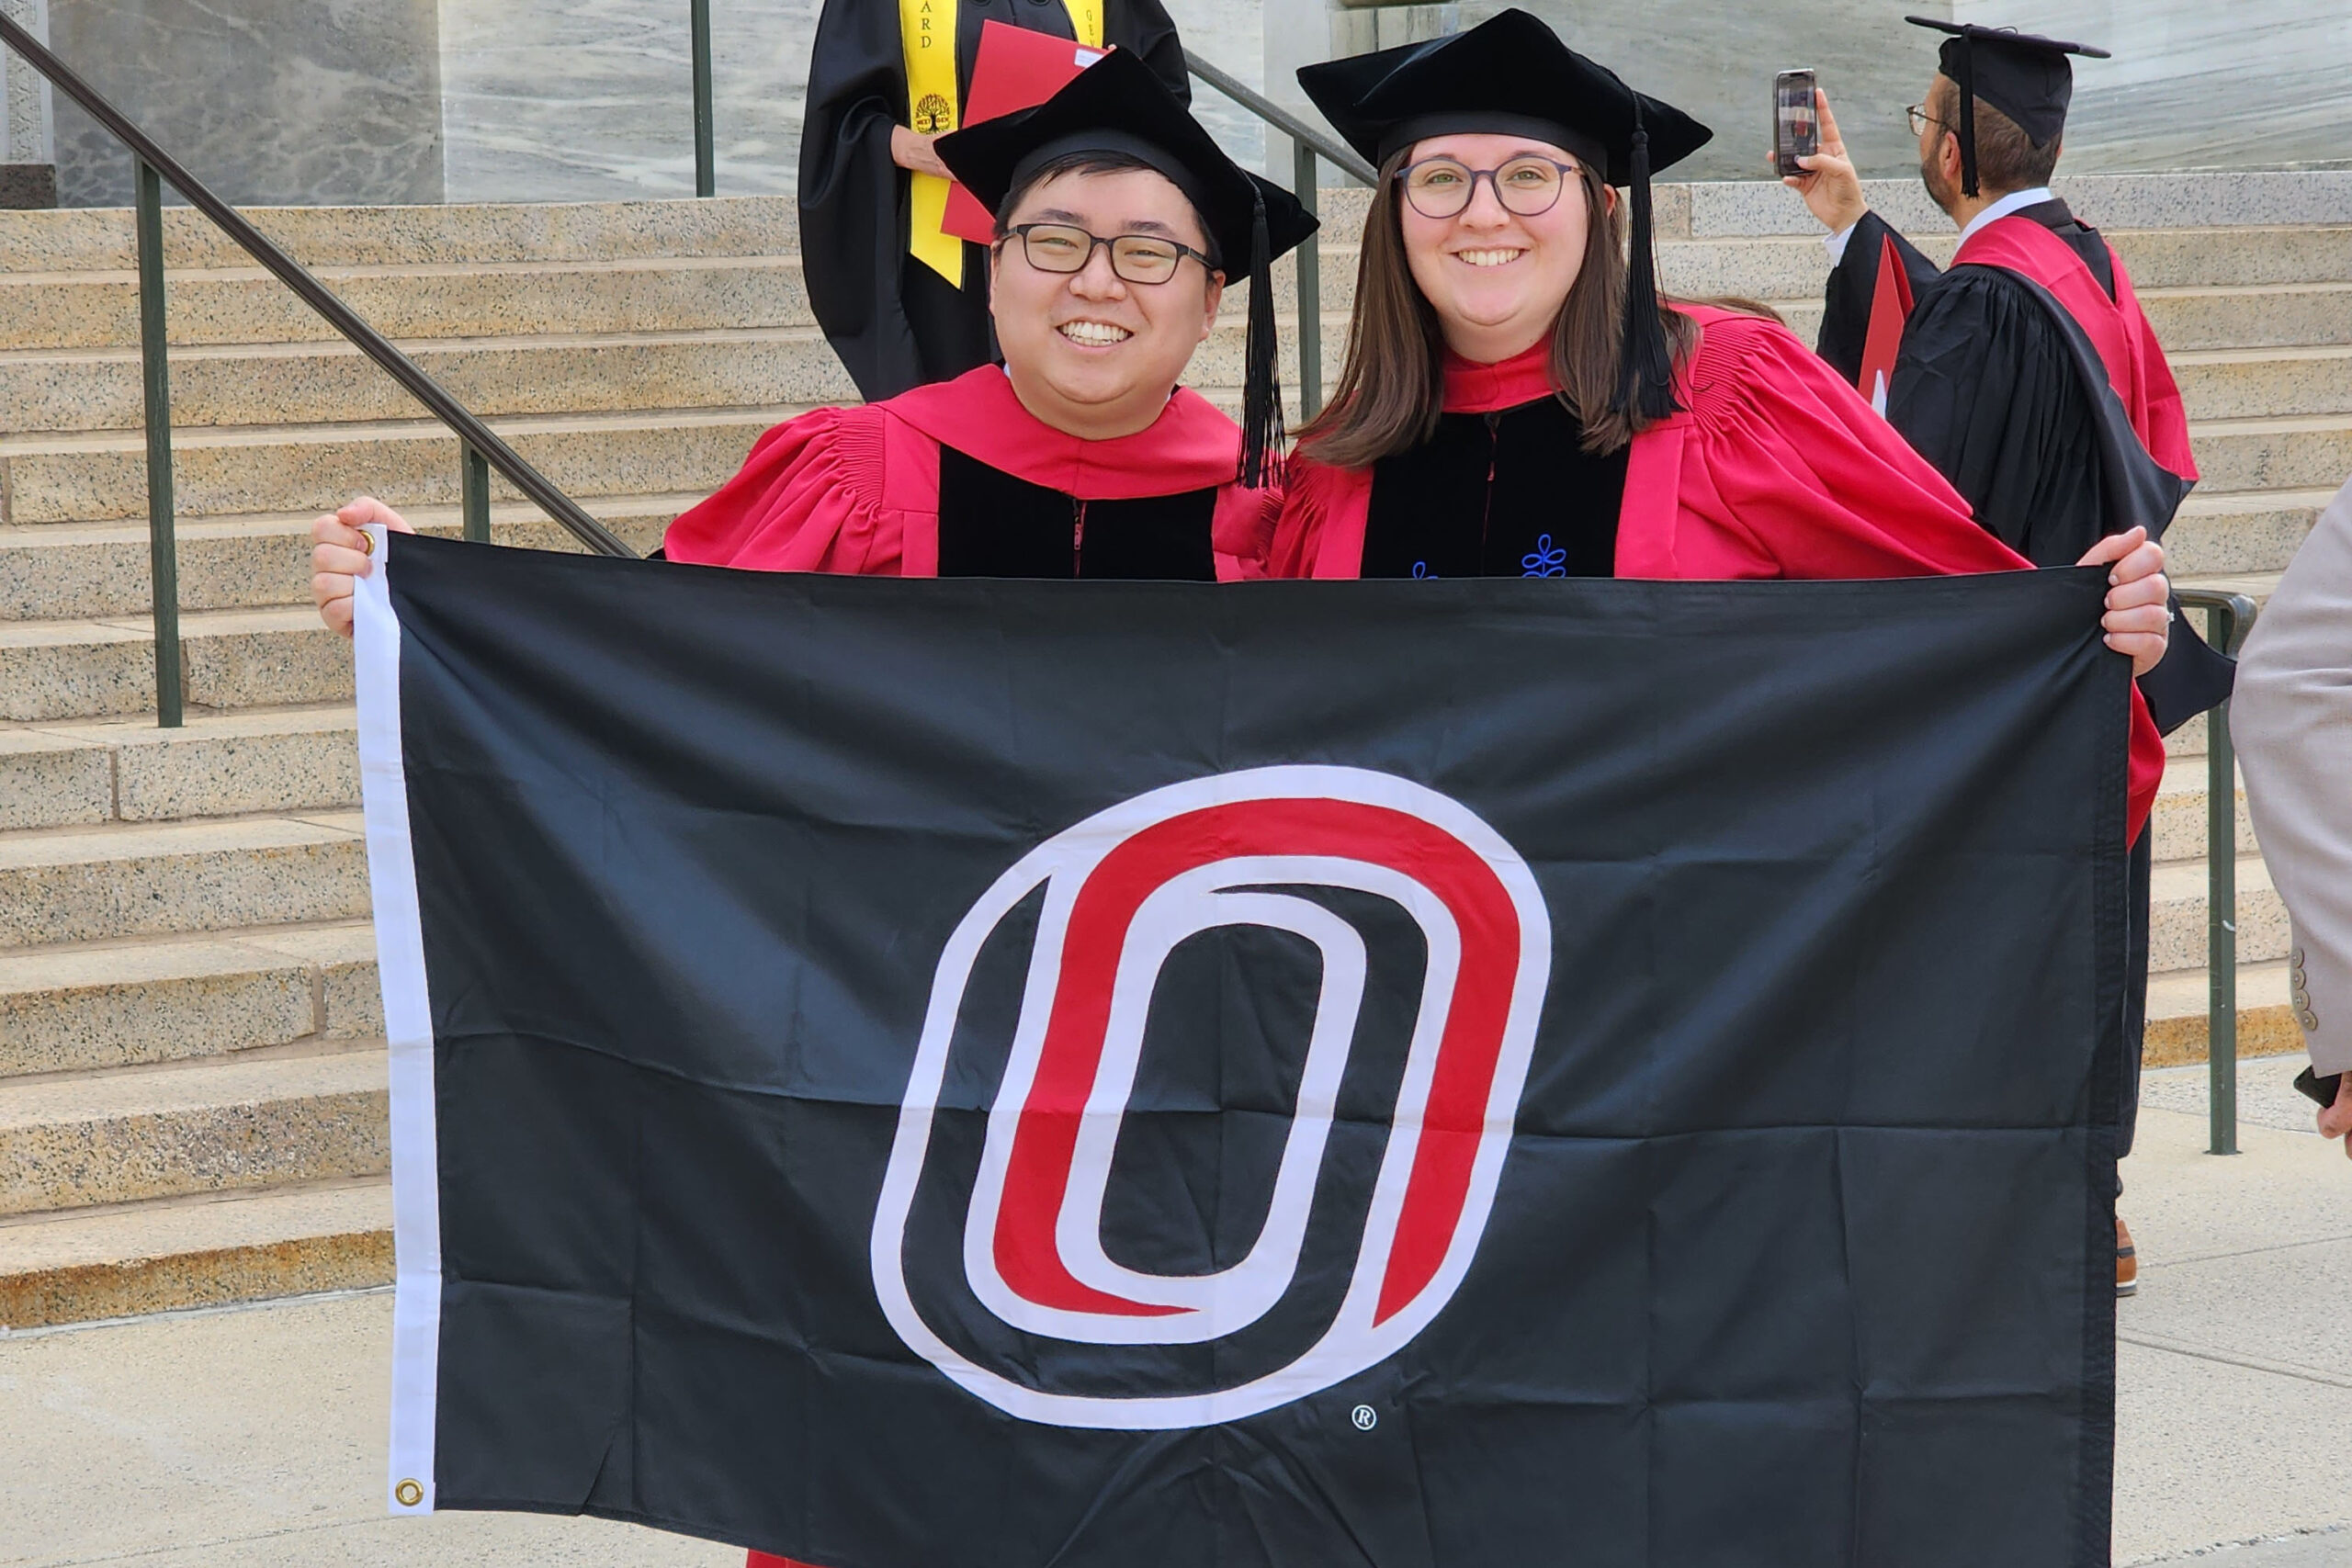 Harim Won&comma; PhD&comma; and his wife&comma; Madalyn Won&comma; PhD&comma; at the Harvard Medical School quad during commencement week for both of their PhDs in May&comma; sporting the UNO Mavericks colors&period;